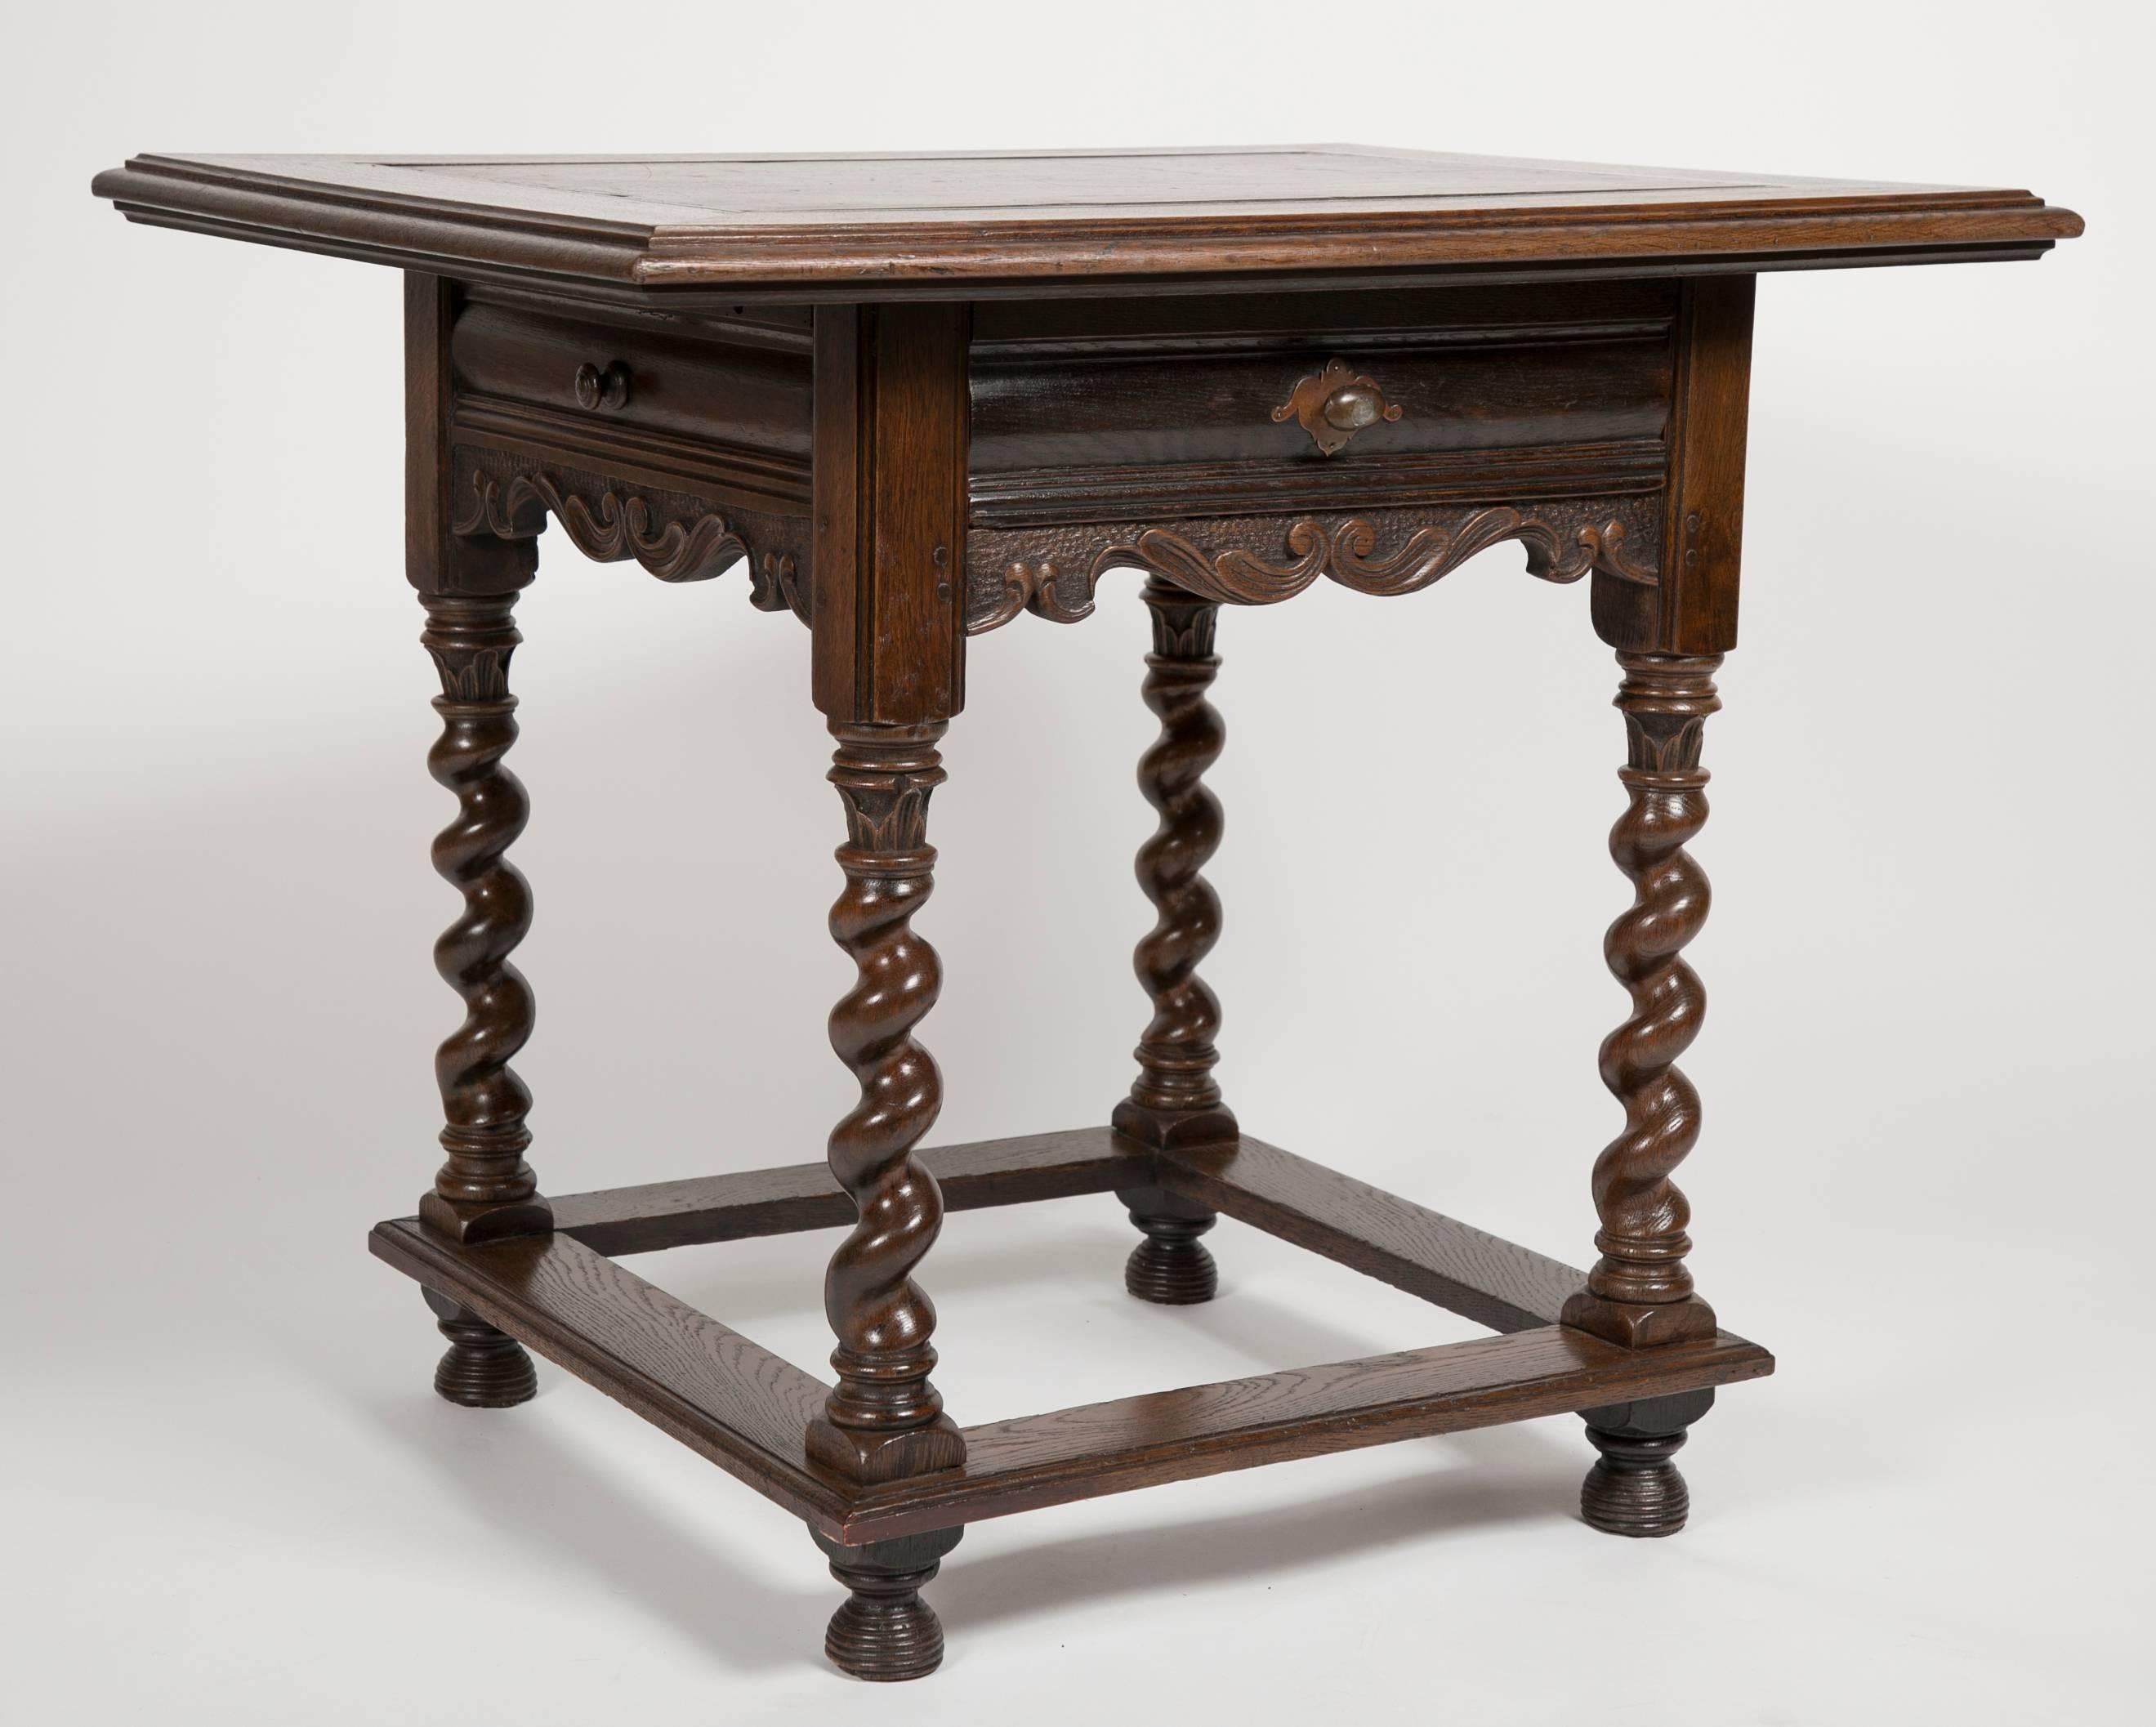 A very handsome Dutch oak center or side table with unusual inlaid slate top. In the Baroque style with barley twist legs and beehive feet. A single drawer with two 'false' drawers on the sides. 
34.5 inches wide 28 deep 29.5 high